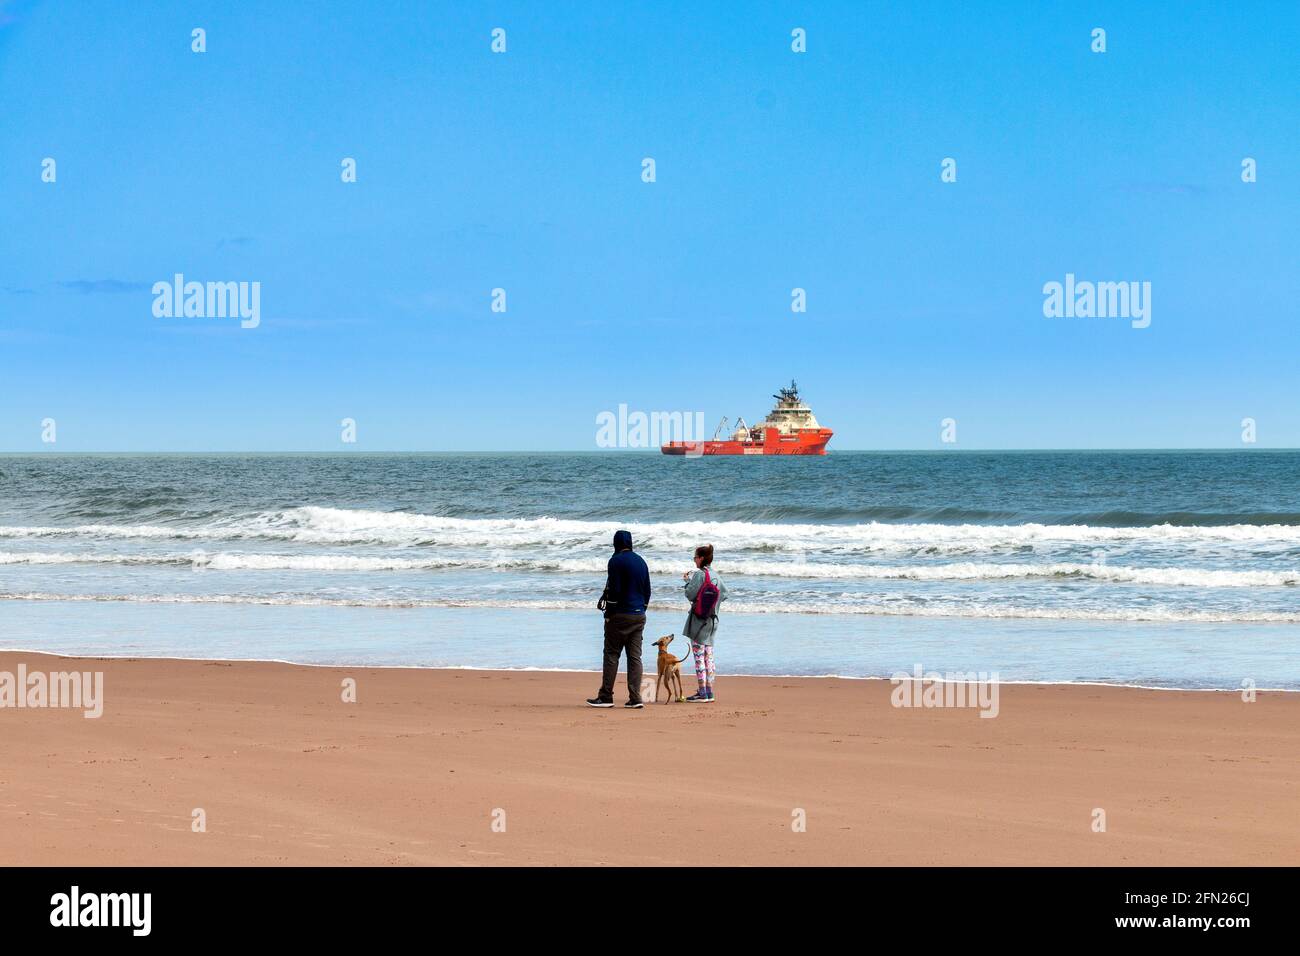 LUNAN BAY AND BEACH ANGUS SCOTLAND PEOPLE ON THE SANDY BEACH AND THE SEA WITH OIL RIG SUPPORT VESSEL Stock Photo